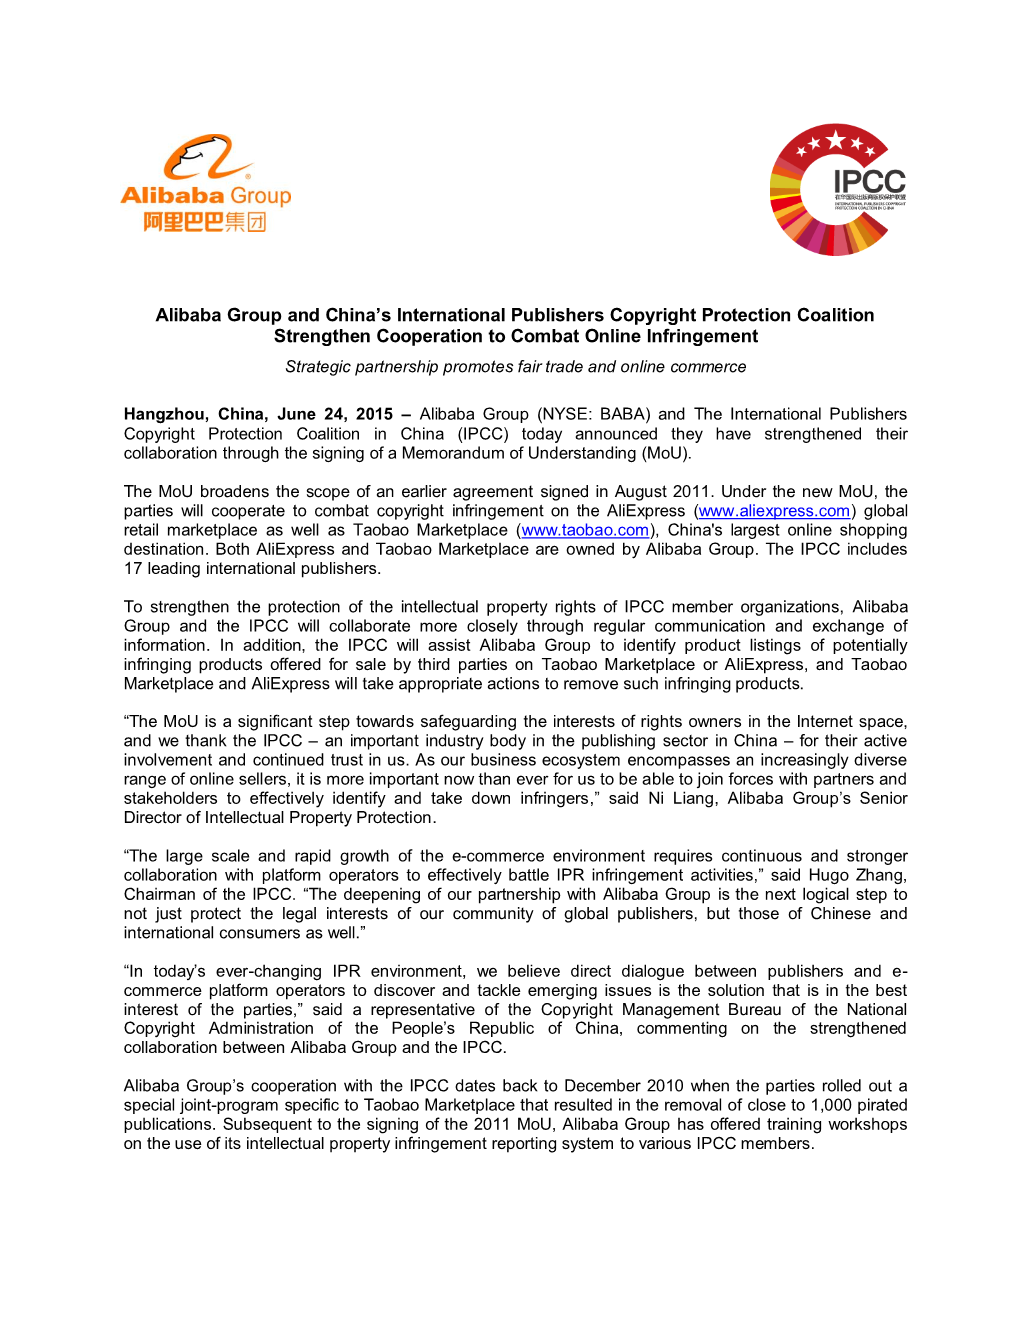 Alibaba Group and China's International Publishers Copyright Protection Coalition Strengthen Cooperation to Combat Online Infr